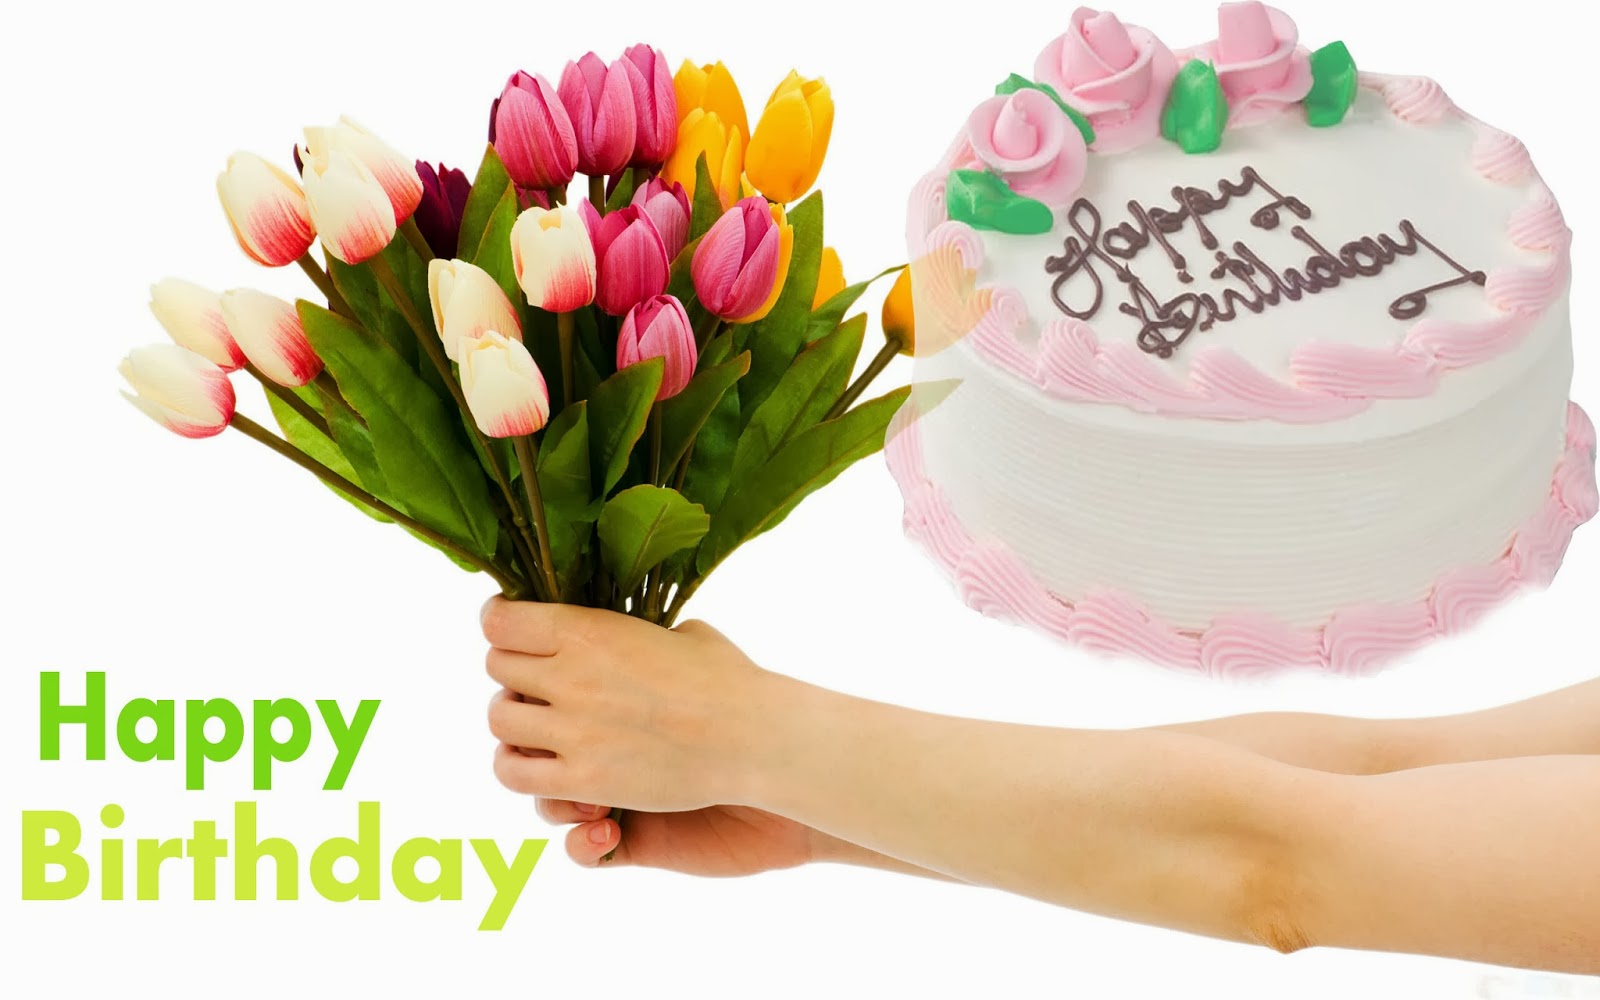 Happy Birthday Wishes, Images, Wallpaper For Friends 2015